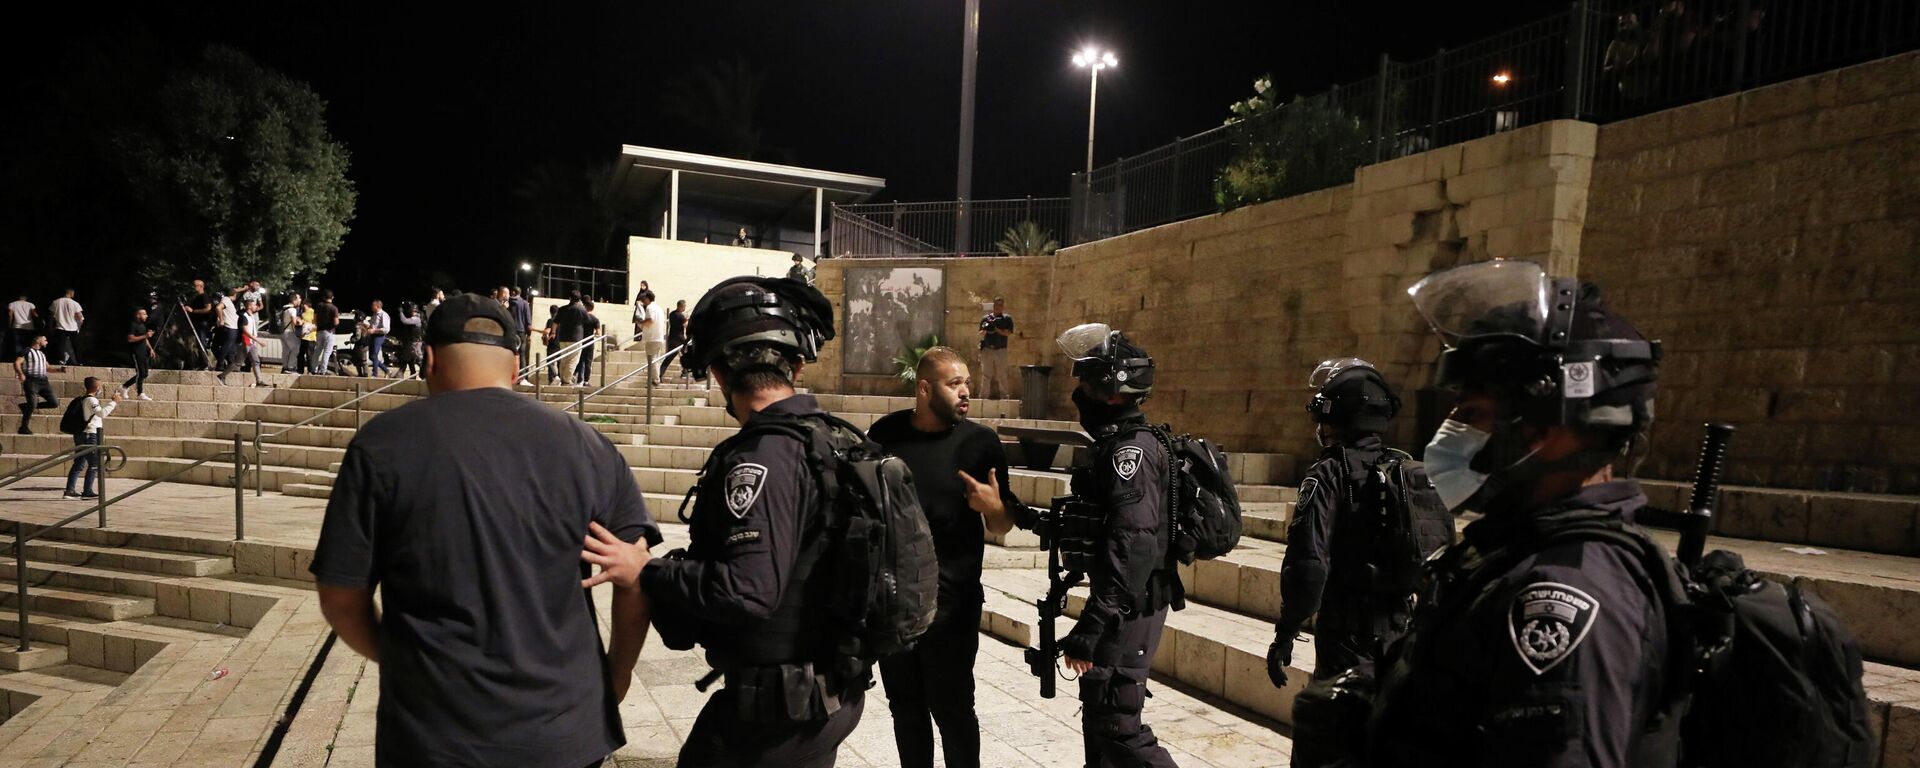 Israeli security force members move protesters during a demonstration to show solidarity with Palestinian prisoners in Israeli jails, after six Palestinian militants broke out of a maximum security Israeli prison this week, near Damascus Gate just outside Jerusalem's Old City September 8, 2021. - Sputnik International, 1920, 08.09.2021